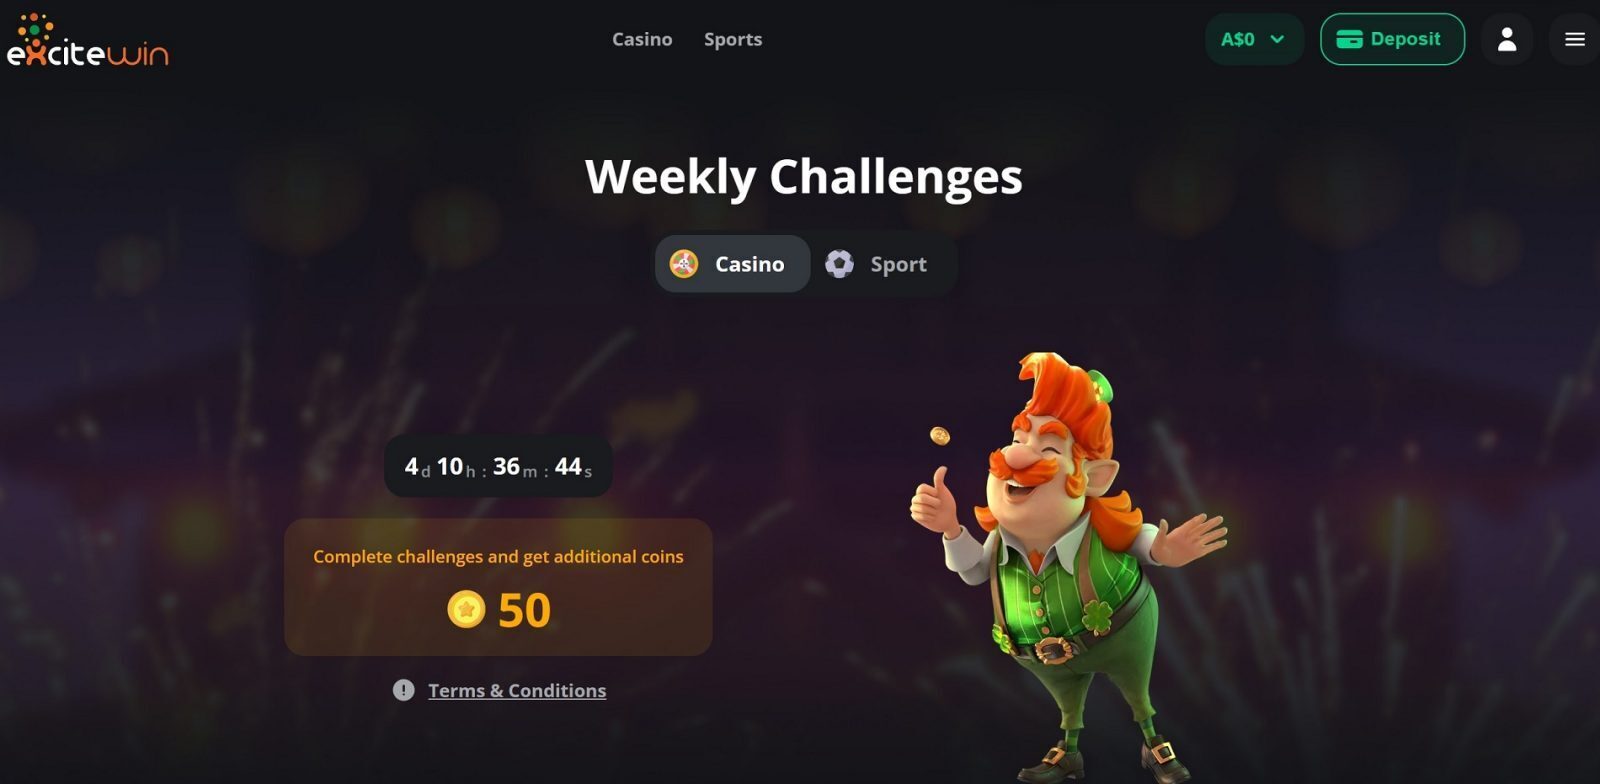 ExciteWin challenges and bonuses